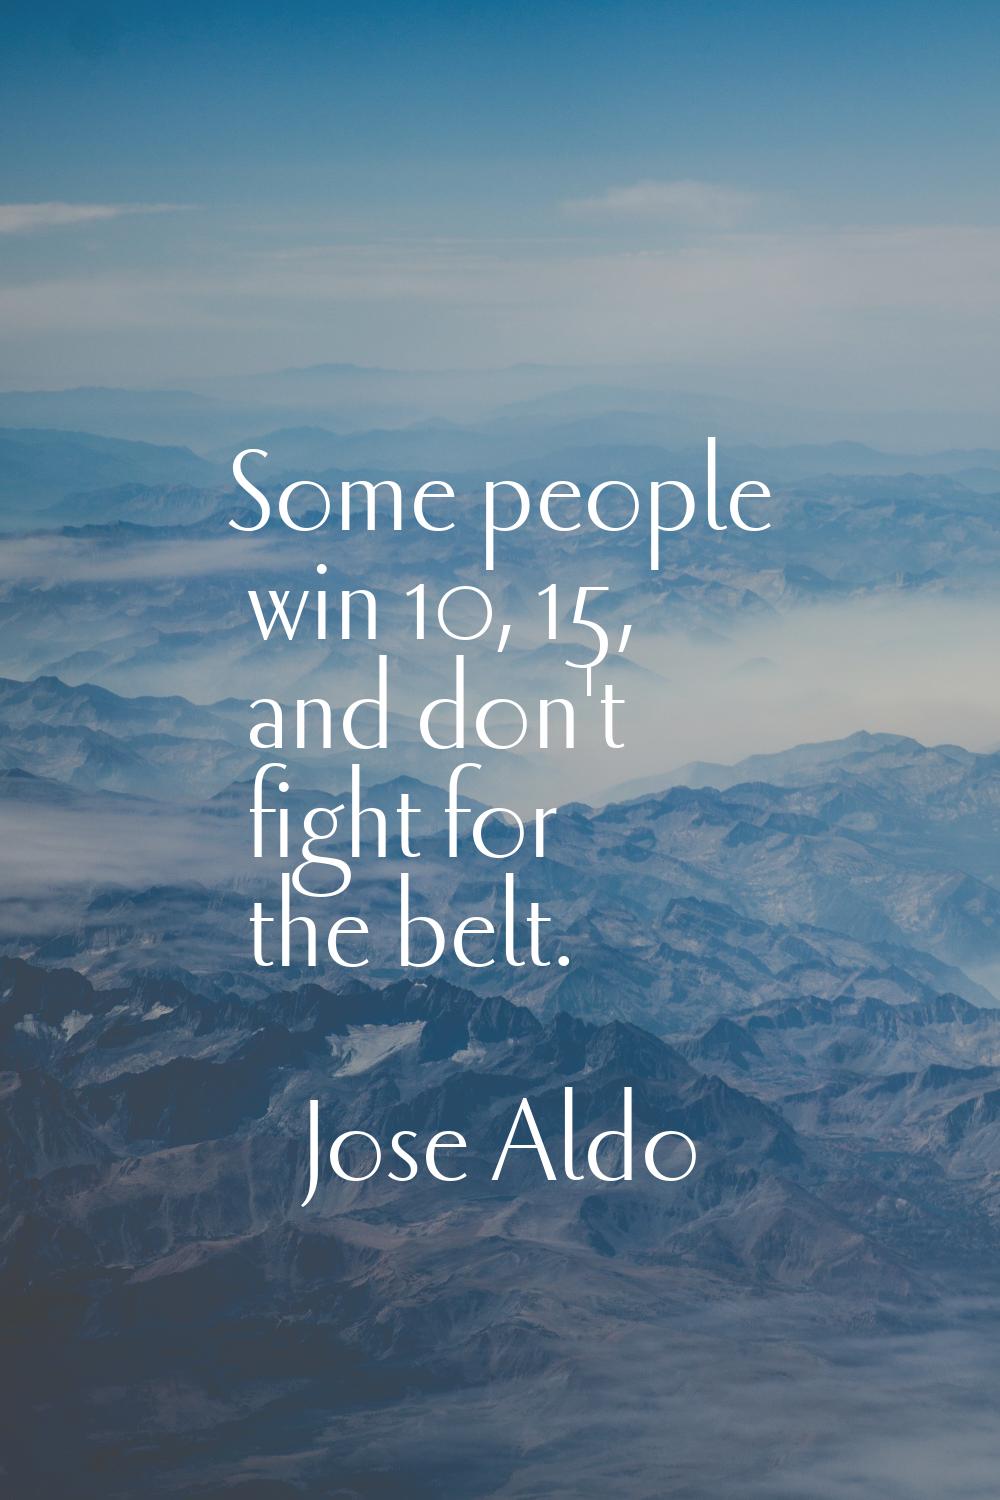 Some people win 10, 15, and don't fight for the belt.